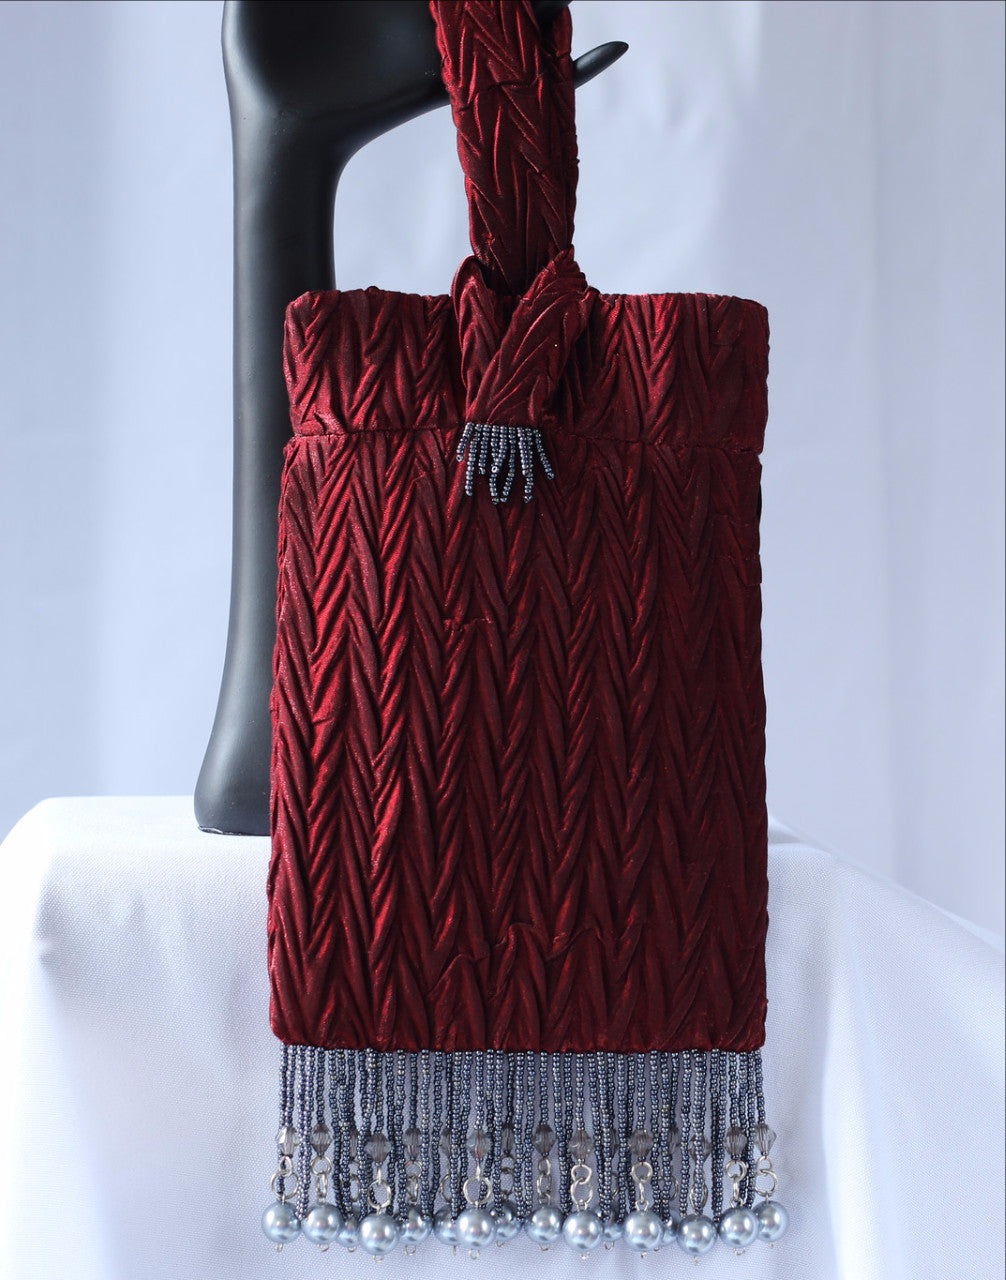 Burgundy Evening Bag with grey lining from Jenny Jag-Wear Design. Hand-crafted beaded fringe in grey pearls and seed beads. The Zara Collection from Jenny Jag-Wear Design